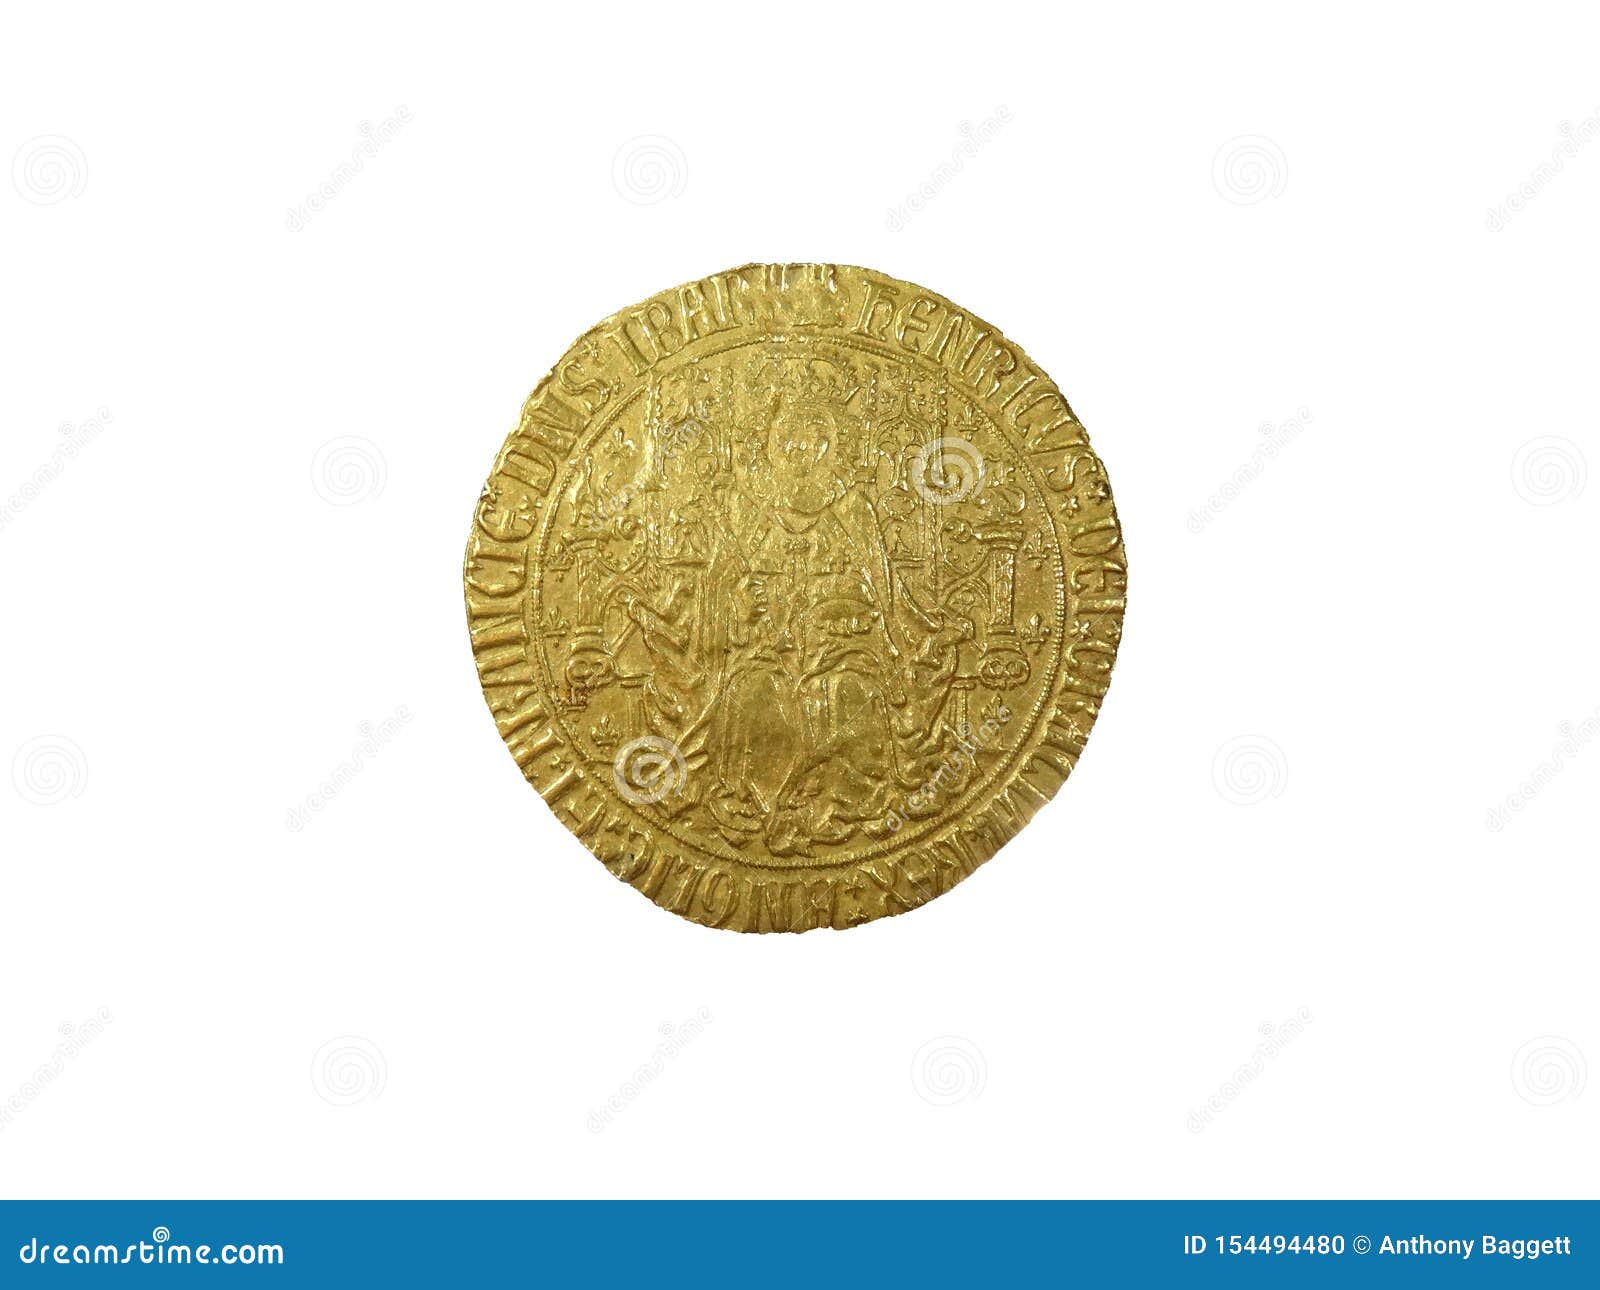 king henry vii gold sovereign coin